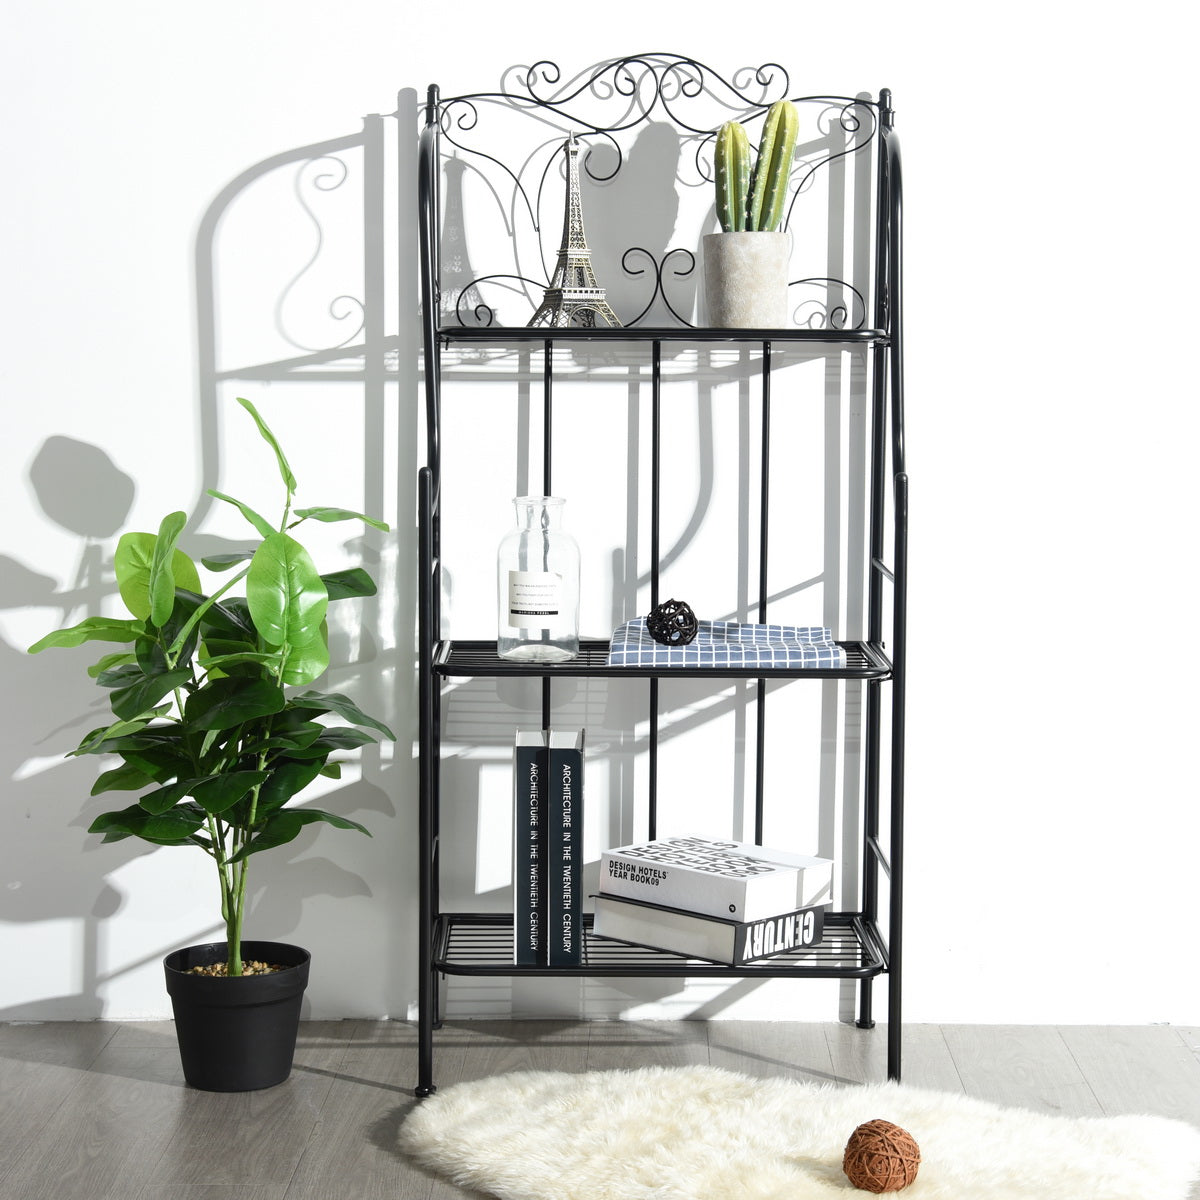 Flower shelf, plant holder, in metal with 3 levels - KAIN 3 TIERS JM